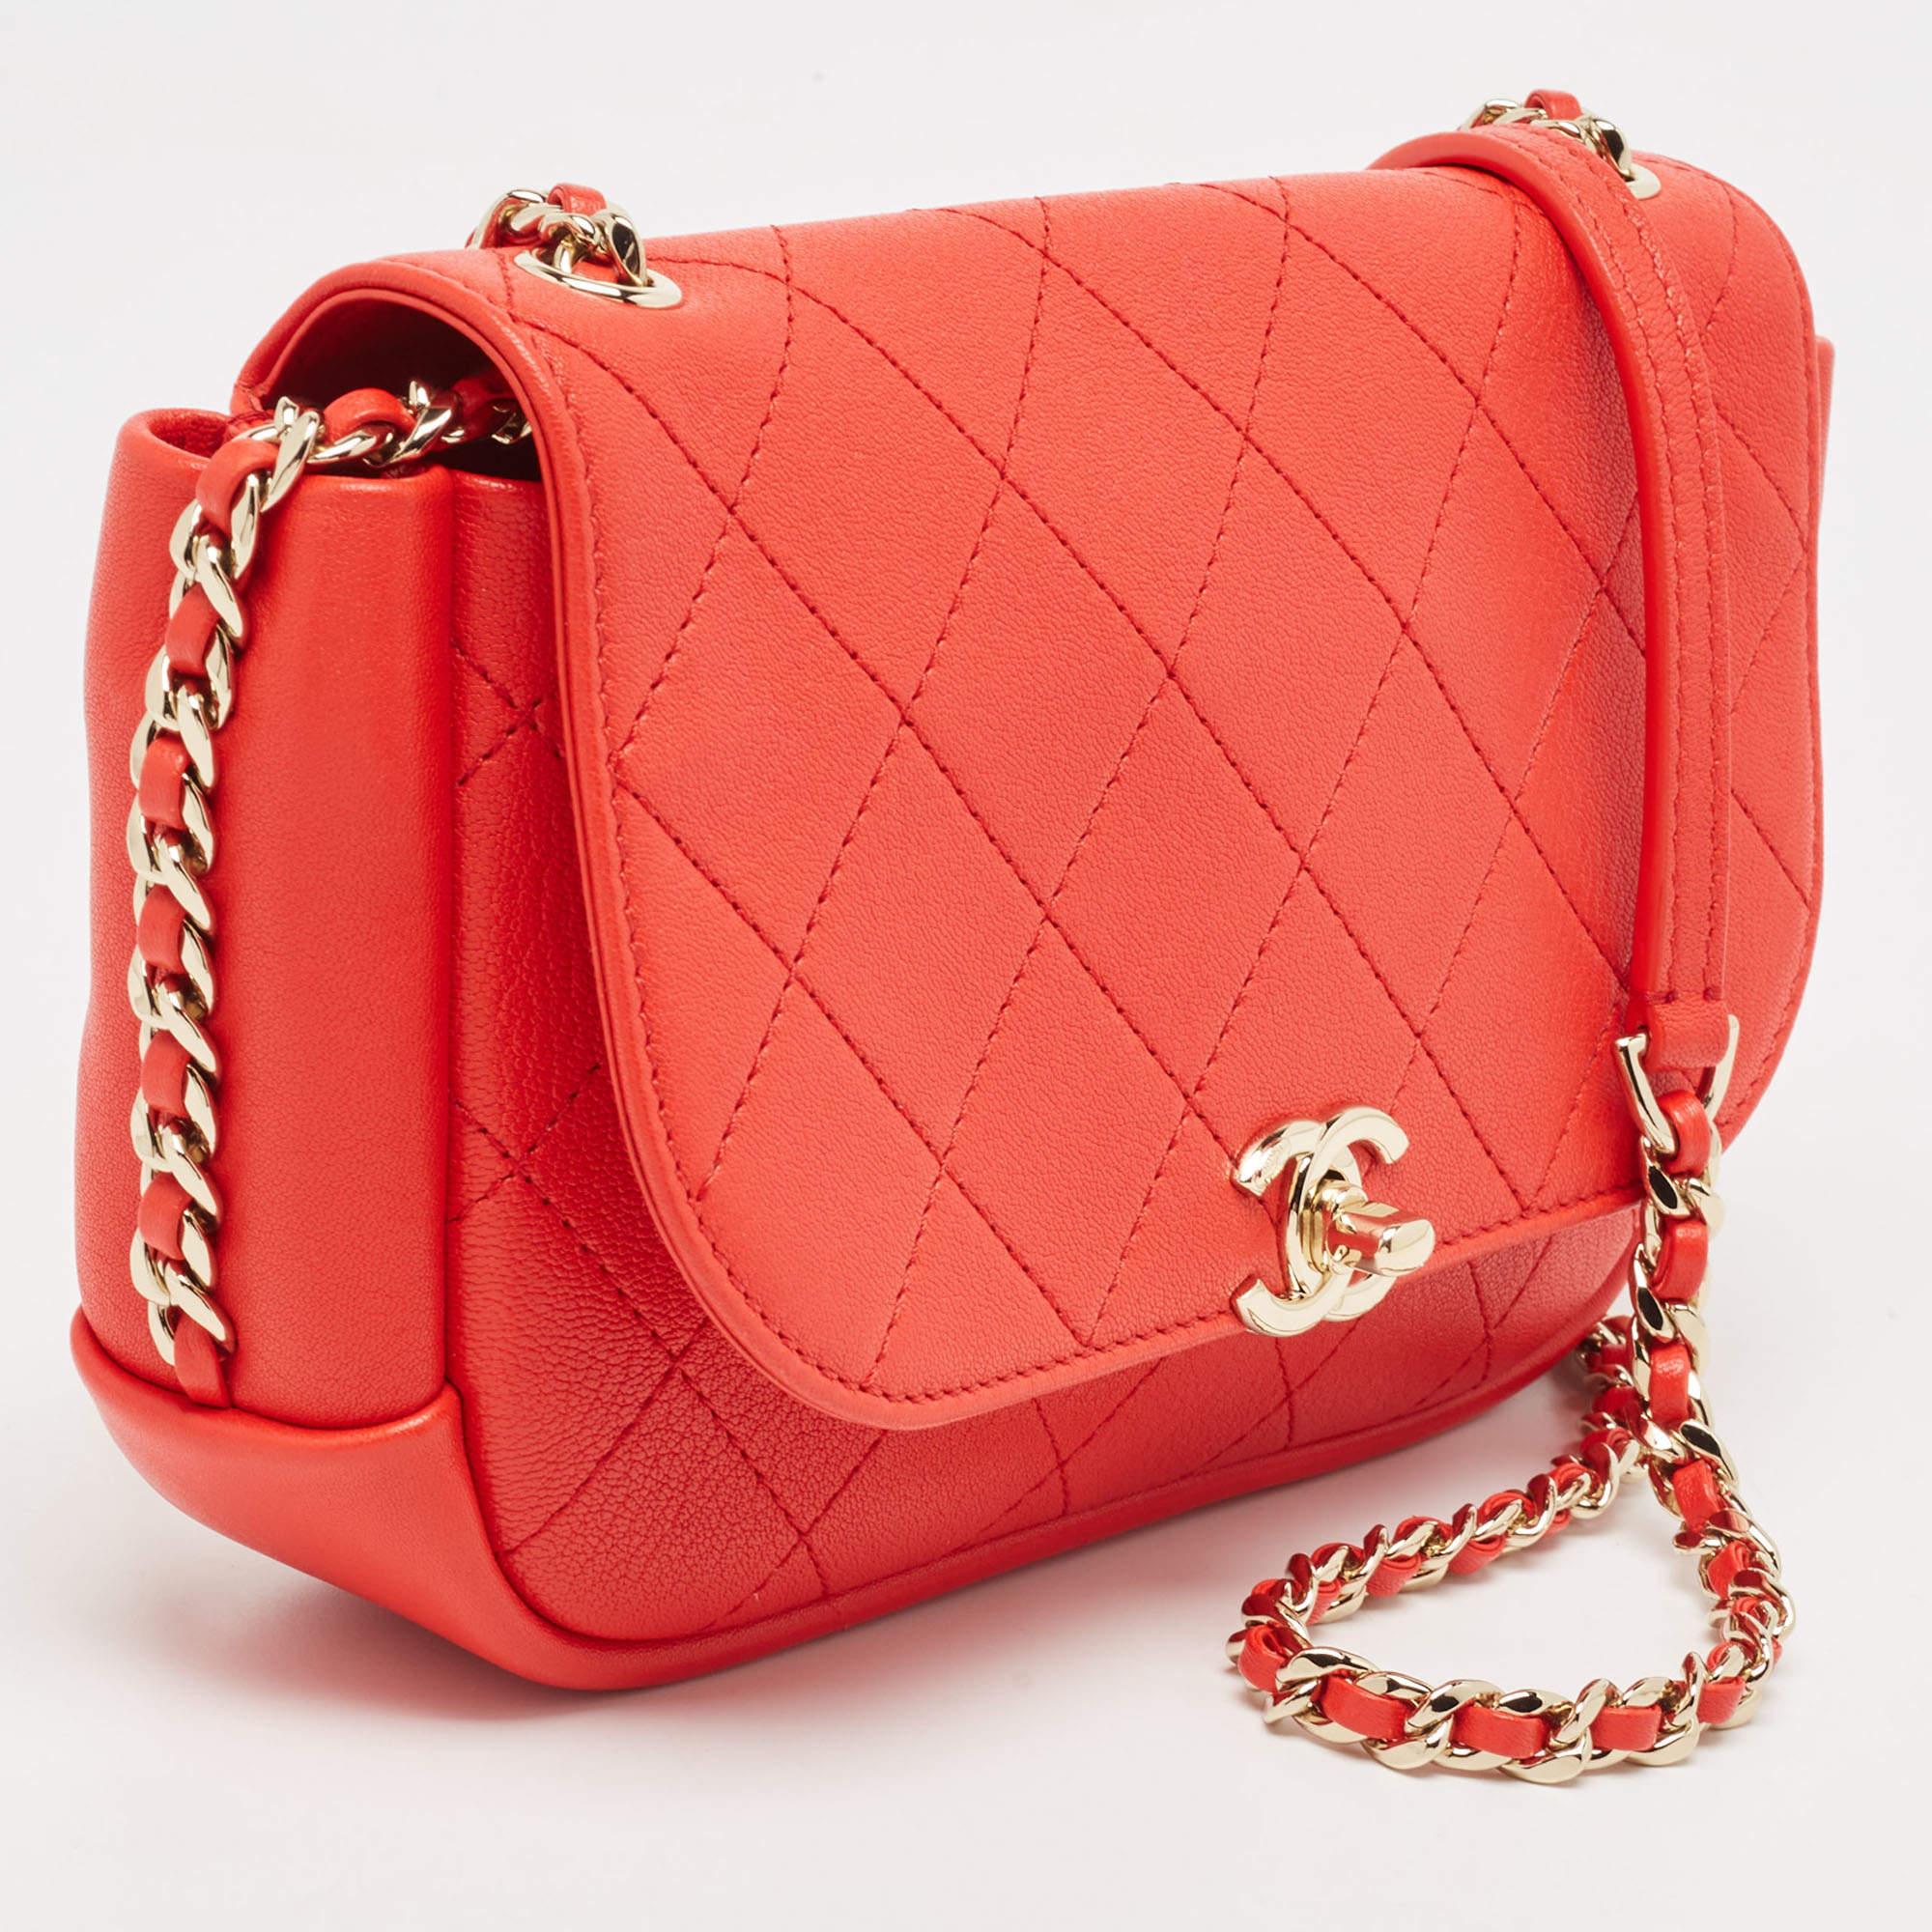 Chanel Red Quilted Leather Small Casual Trip Flap Bag In Excellent Condition For Sale In Dubai, Al Qouz 2